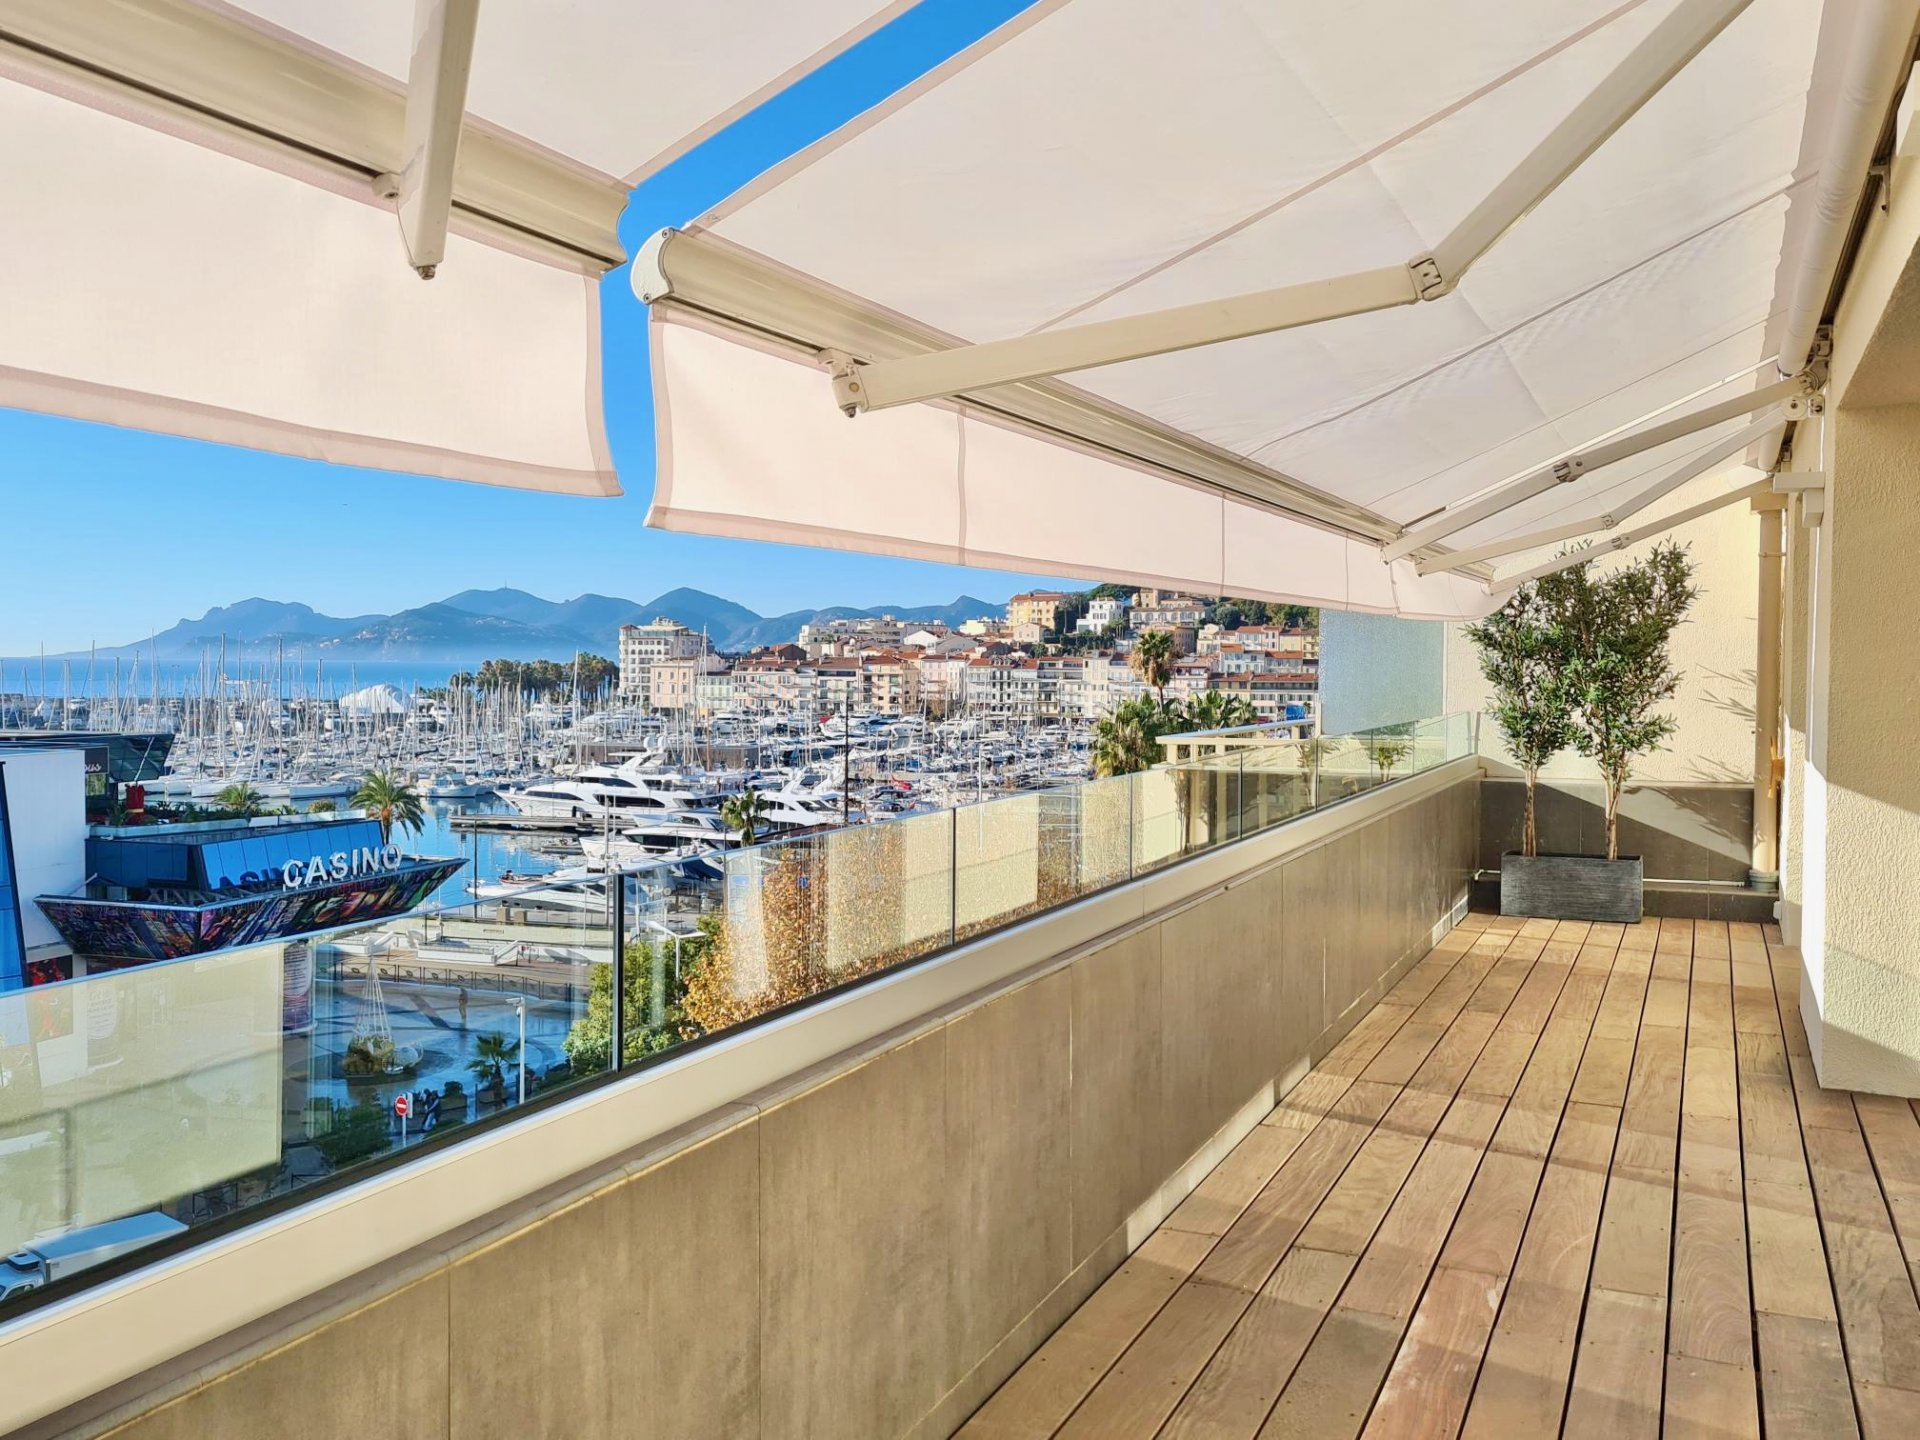 3 Bedroom Apartment For Sale in Cannes